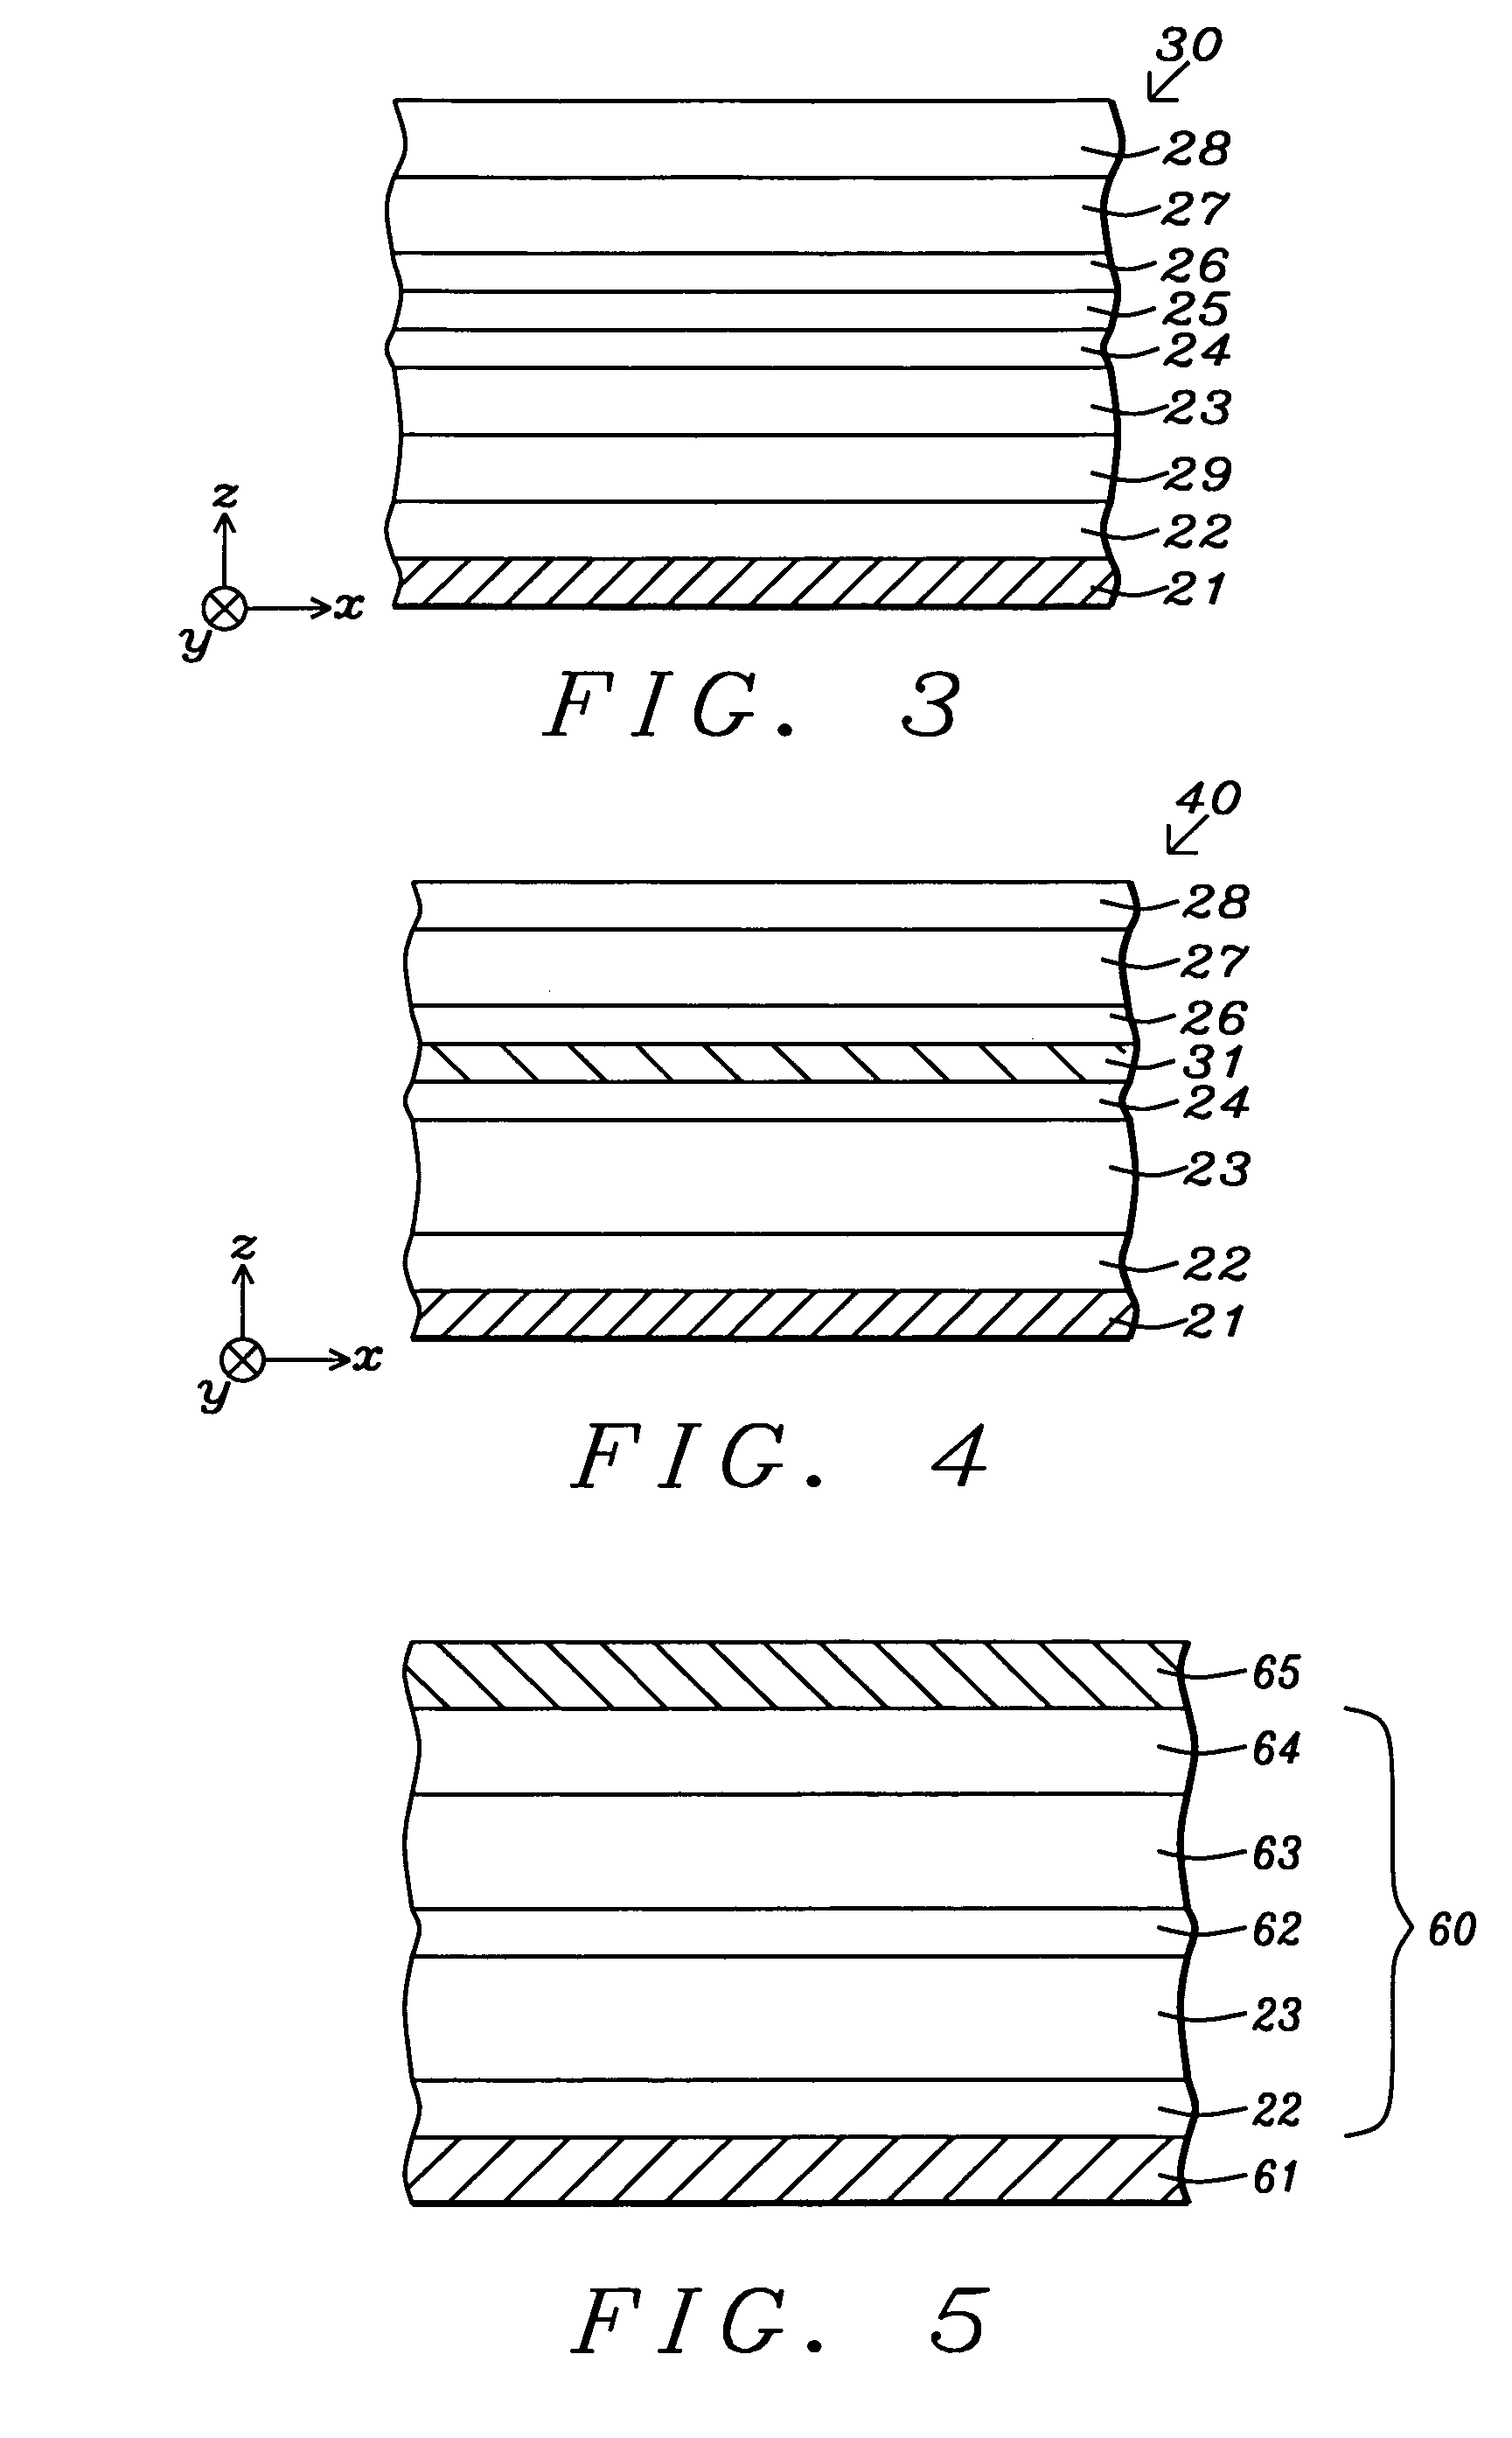 MTJ incorporating CoFe/Ni multilayer film with perpendicular magnetic anisotropy for MRAM application